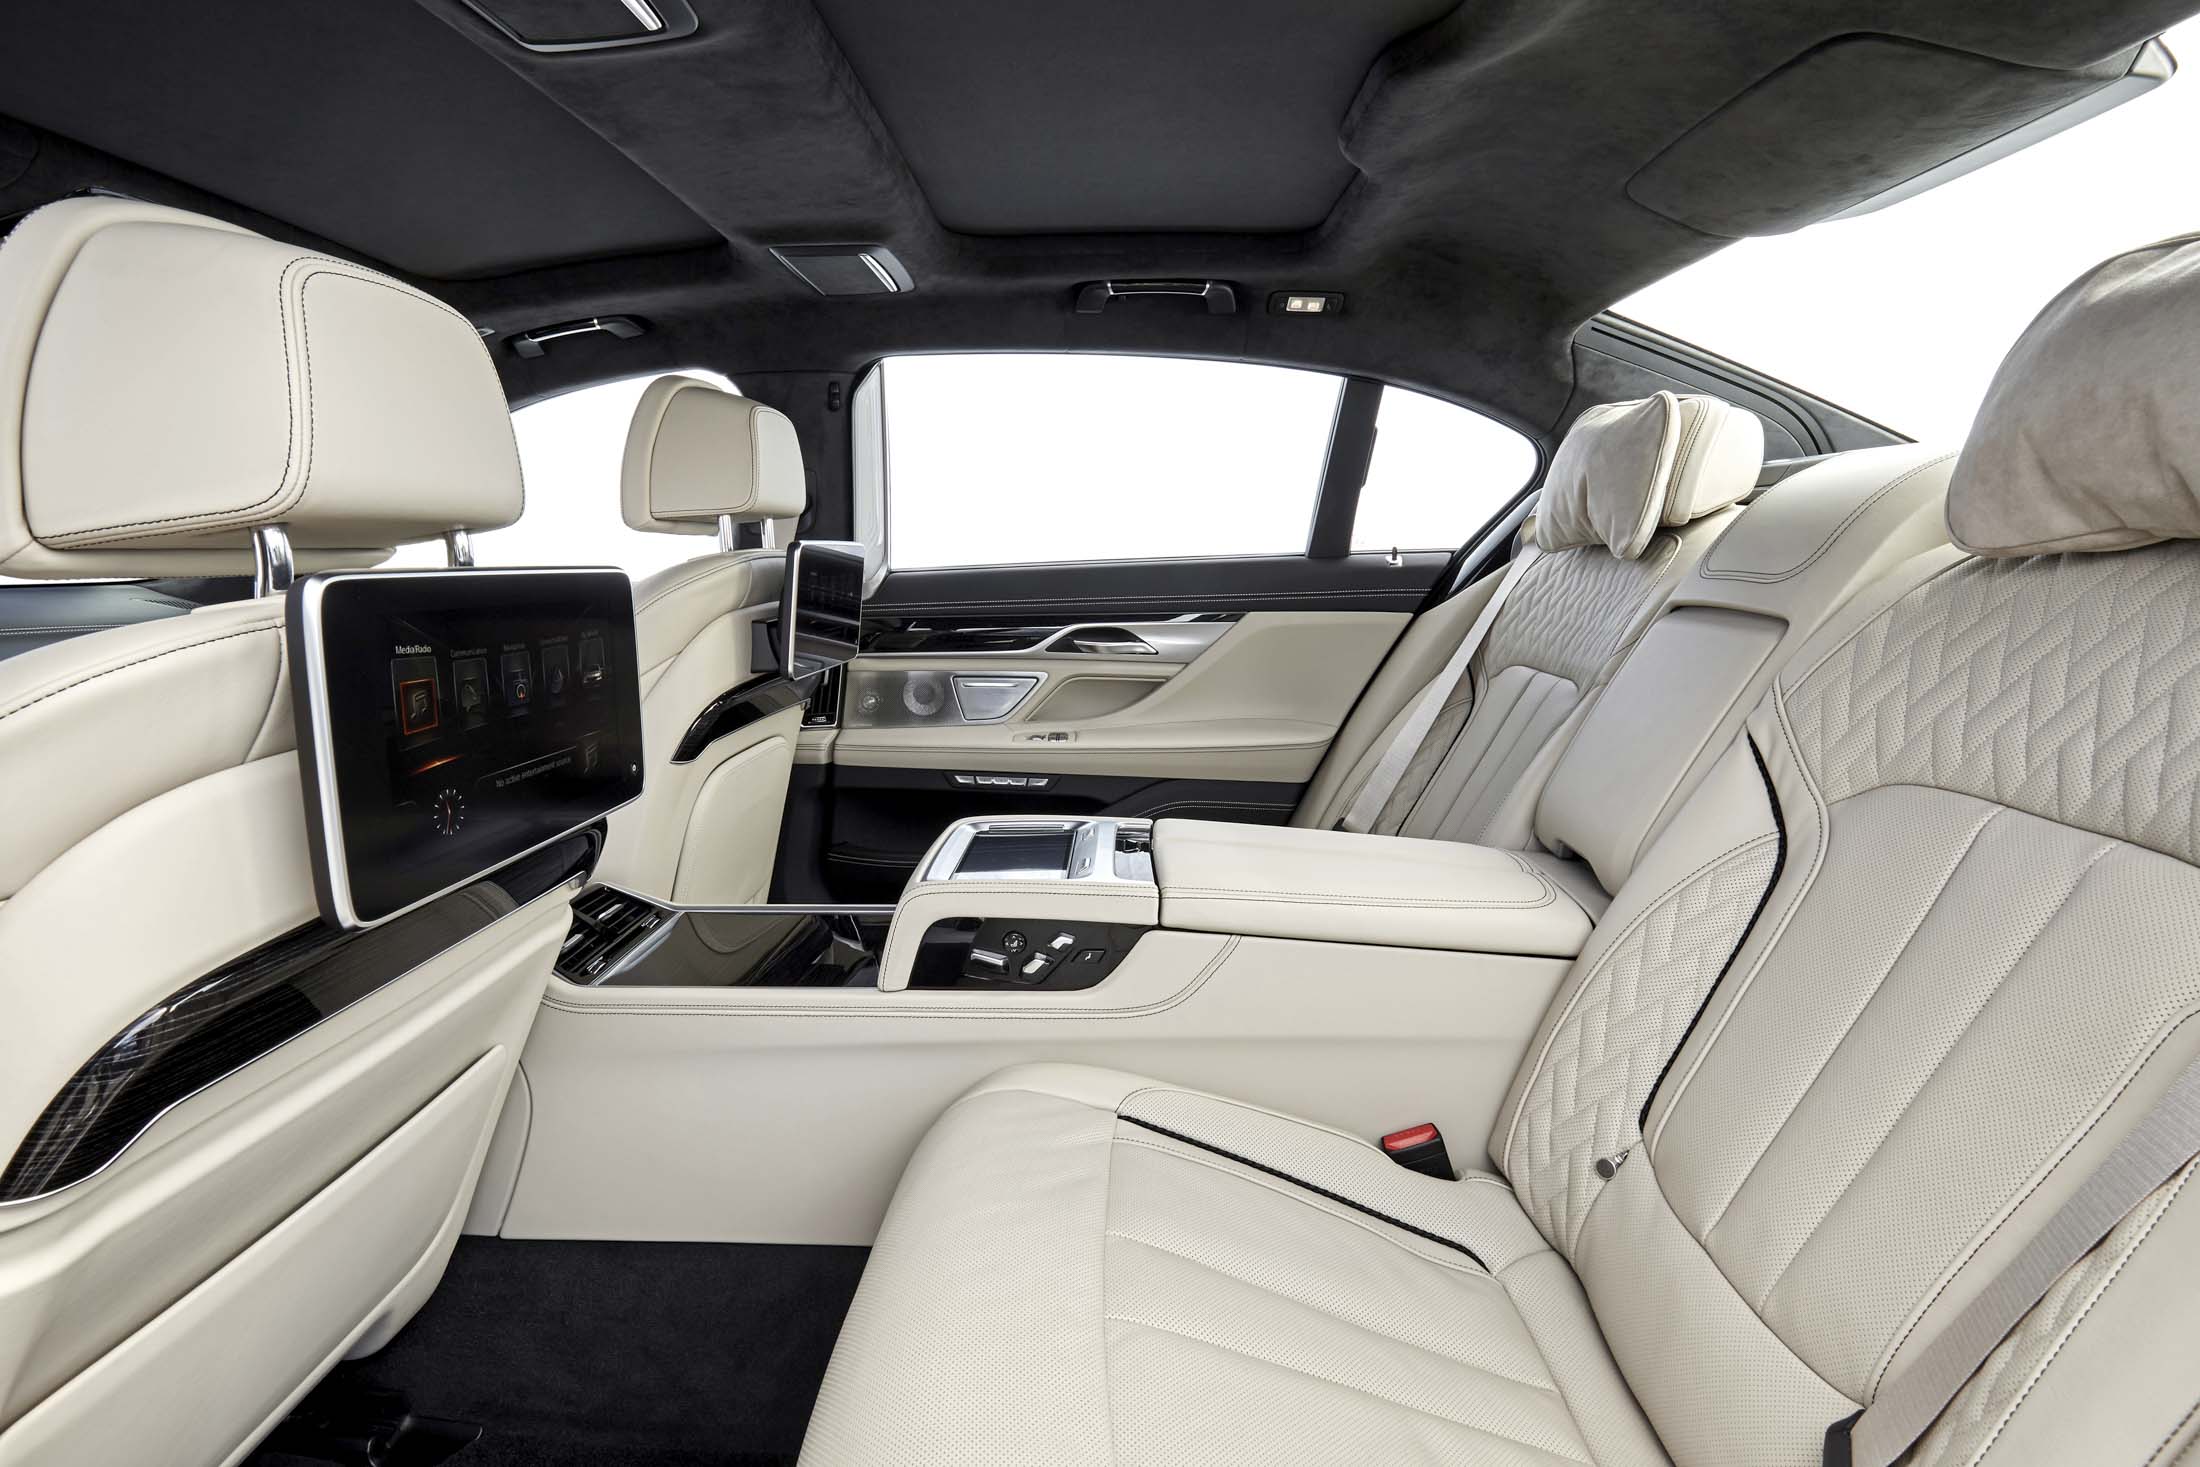 Which Luxury Cars Have the Best Back Seats? - Bloomberg